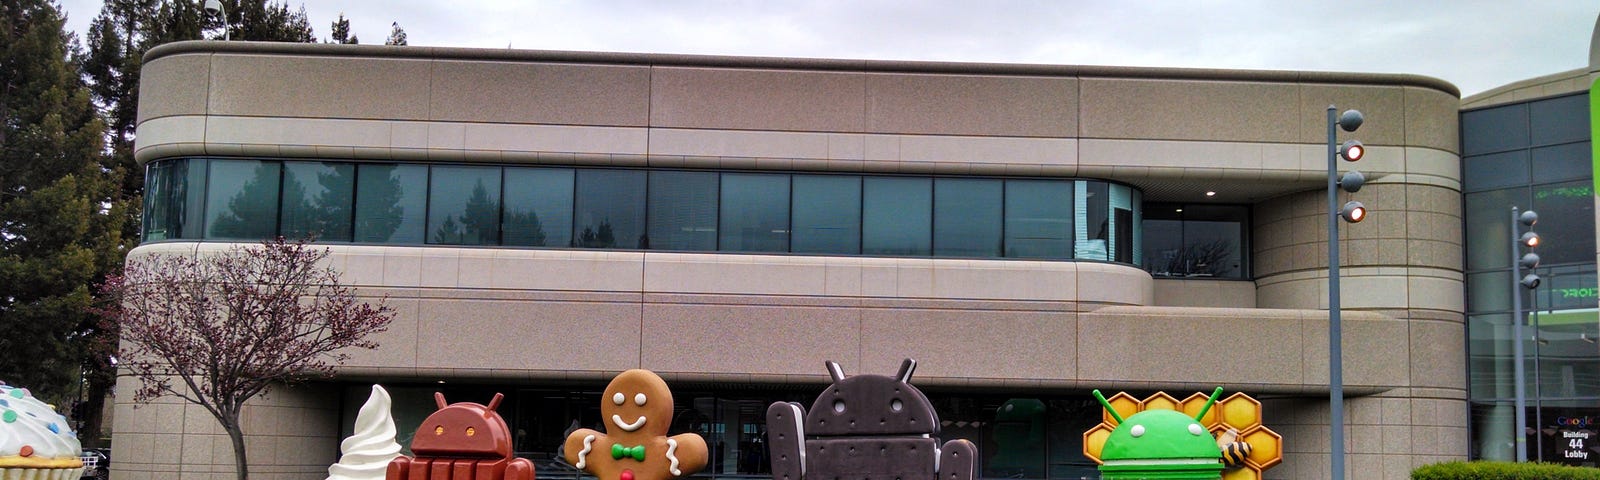 A photo of Android dessert sculptures celebrating Android OS releases in front of Google Building 44 in Mountain View, CA.